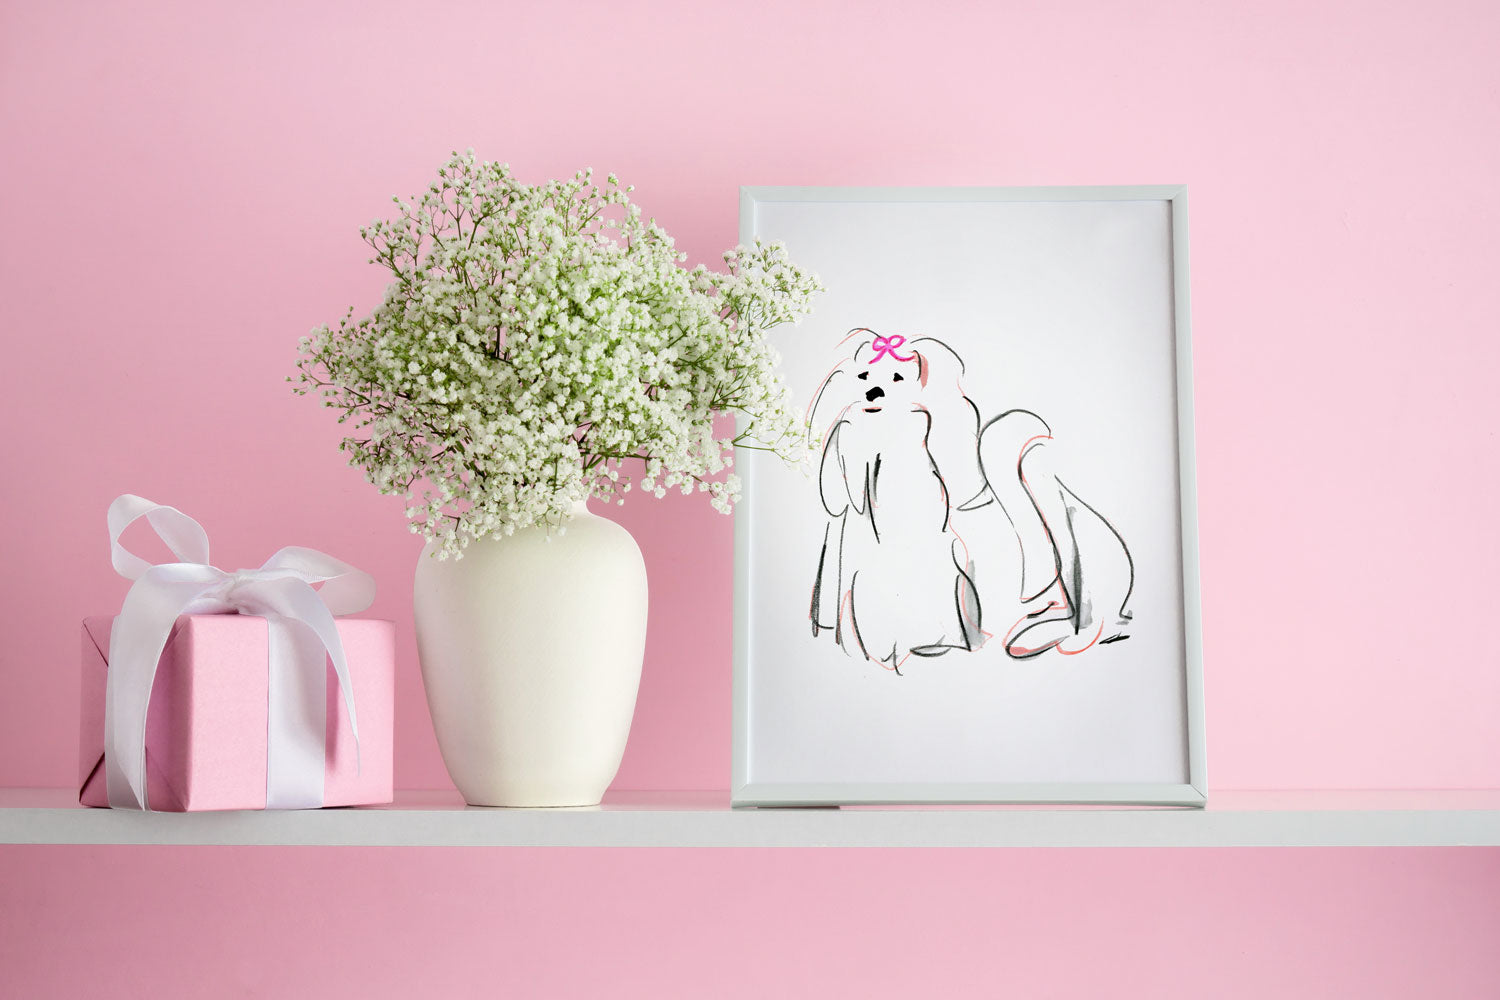 Missy Maltese Art Print - Dog Illustrations Wall Art Collection-Di Lewis